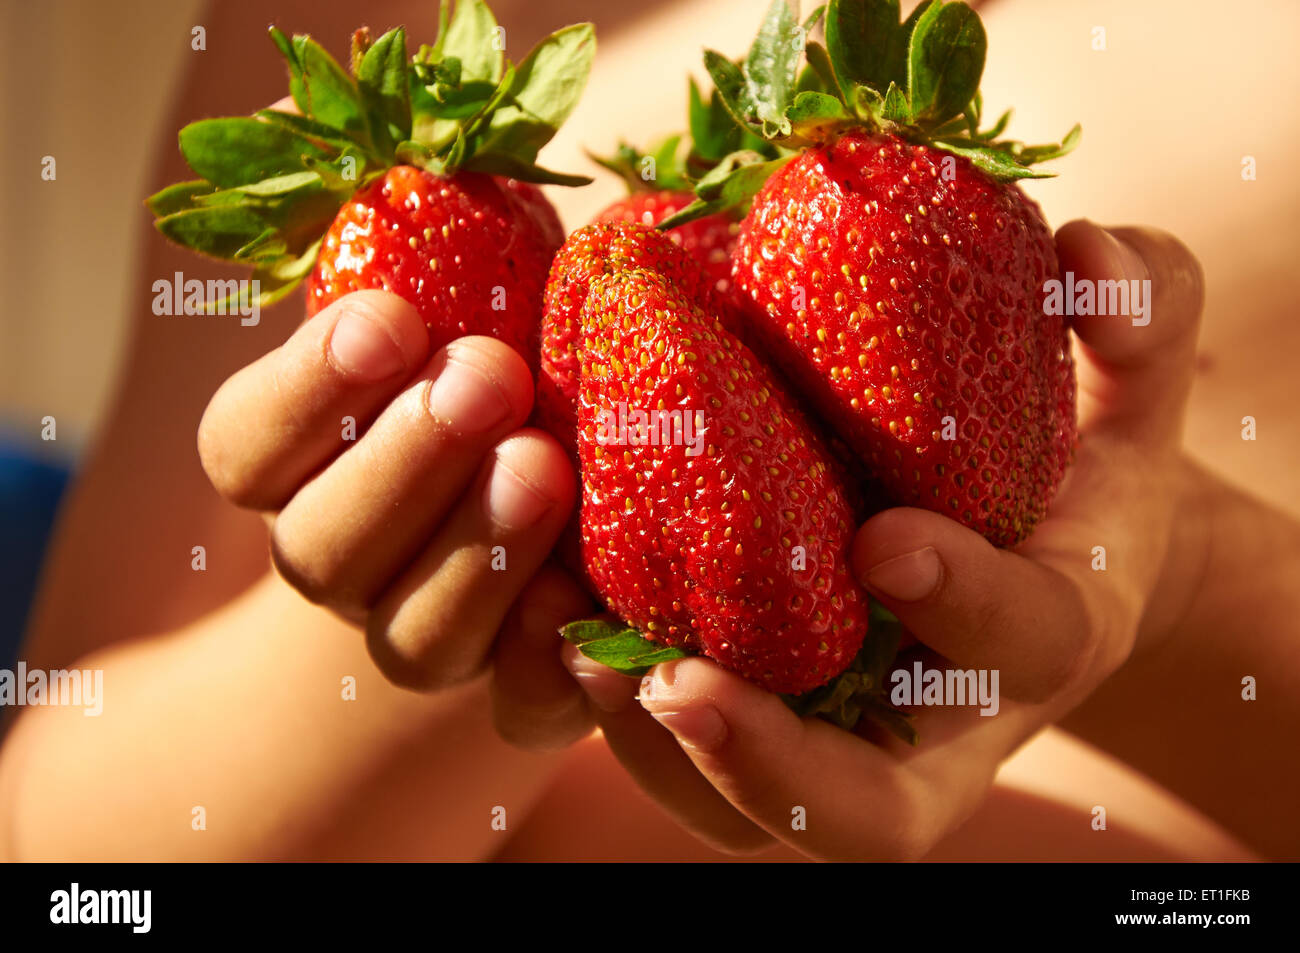 Several huge red ripe strawberries in child's hands Stock Photo